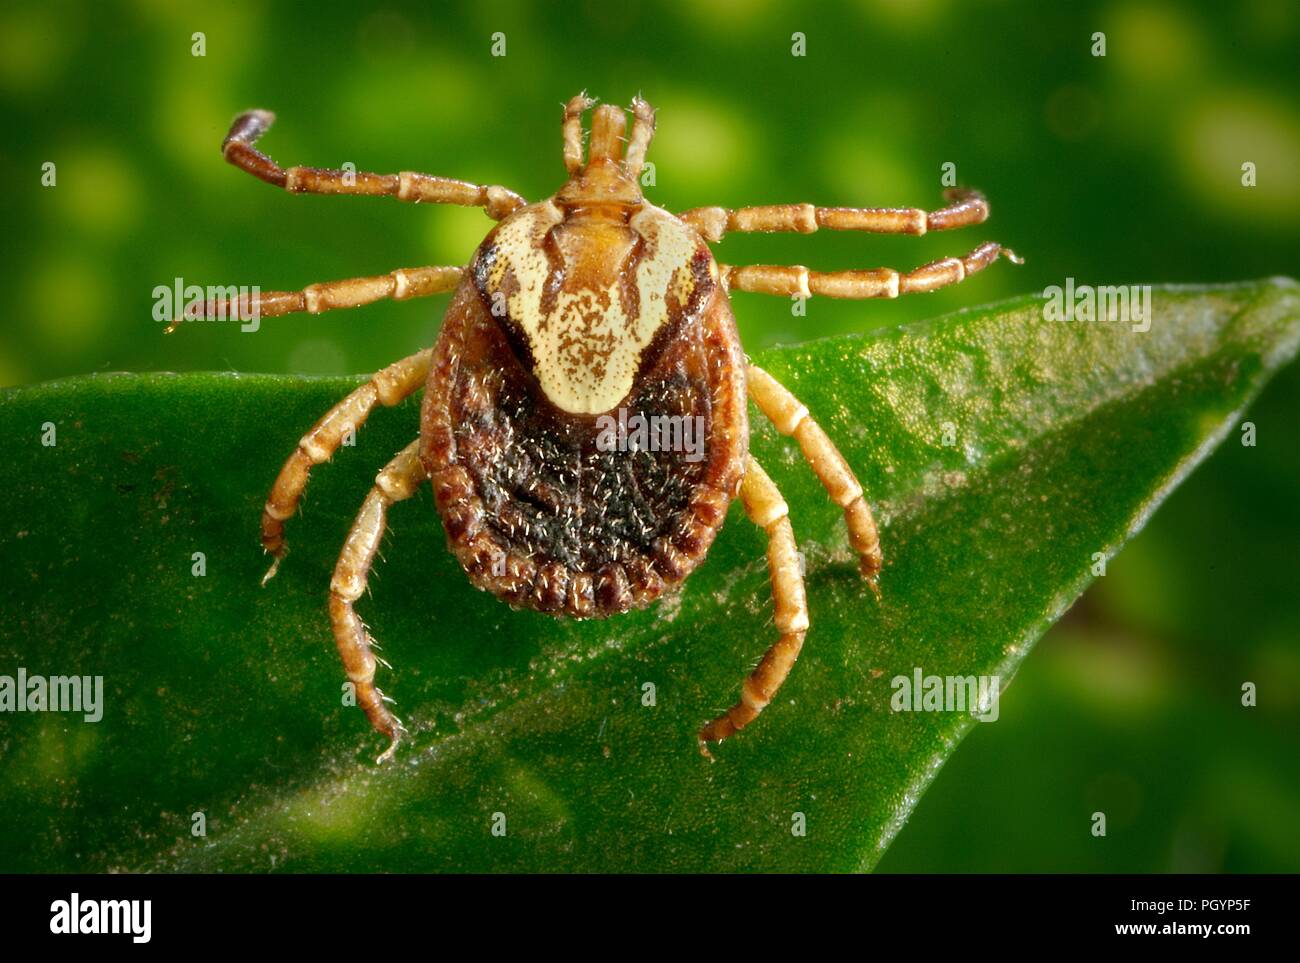 Photograph showing the dorsal view of a brown and cream colored female Cayenne tick (Amblyomma cajennense) an agent of Rocky Mountain spotted fever (RMSF) balancing on the green blade of a plant, image courtesy CDC/Dr Christopher Paddock, 2008. () Stock Photo